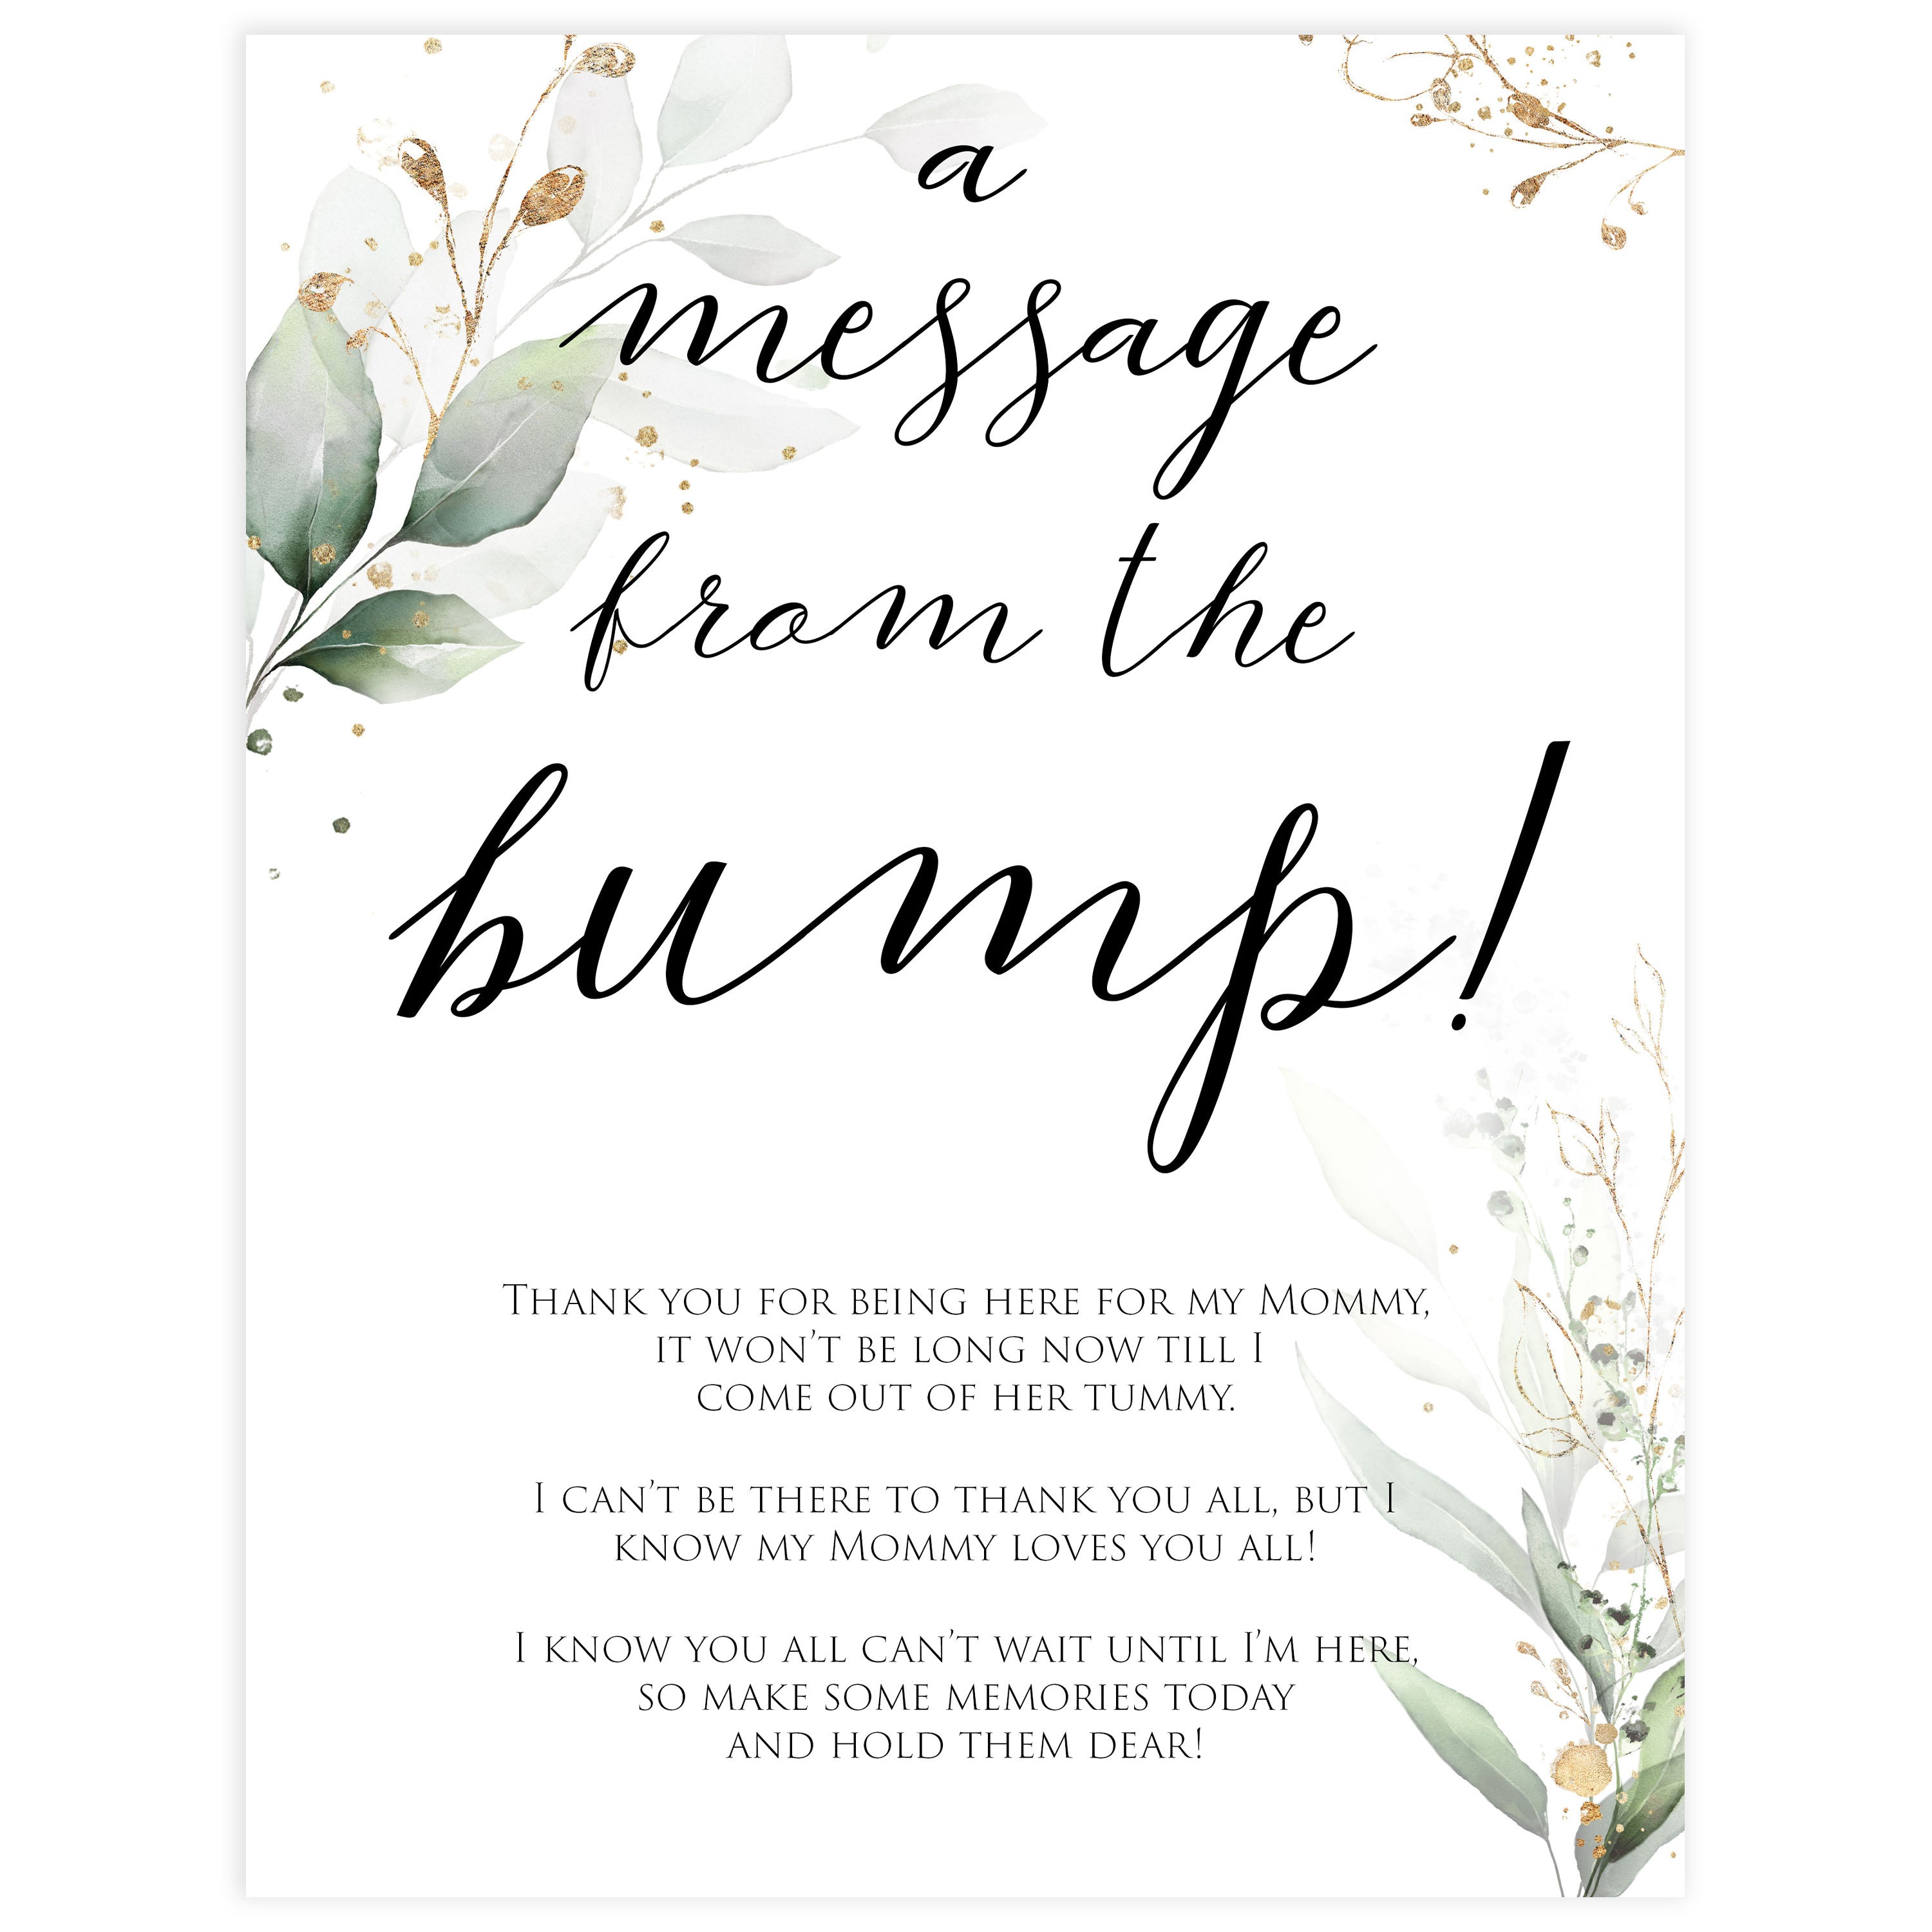 Gold green leaf baby games, message from the bump, printable baby games, fun baby games, top baby games to play, gold leaf baby shower, greenery baby shower ideas